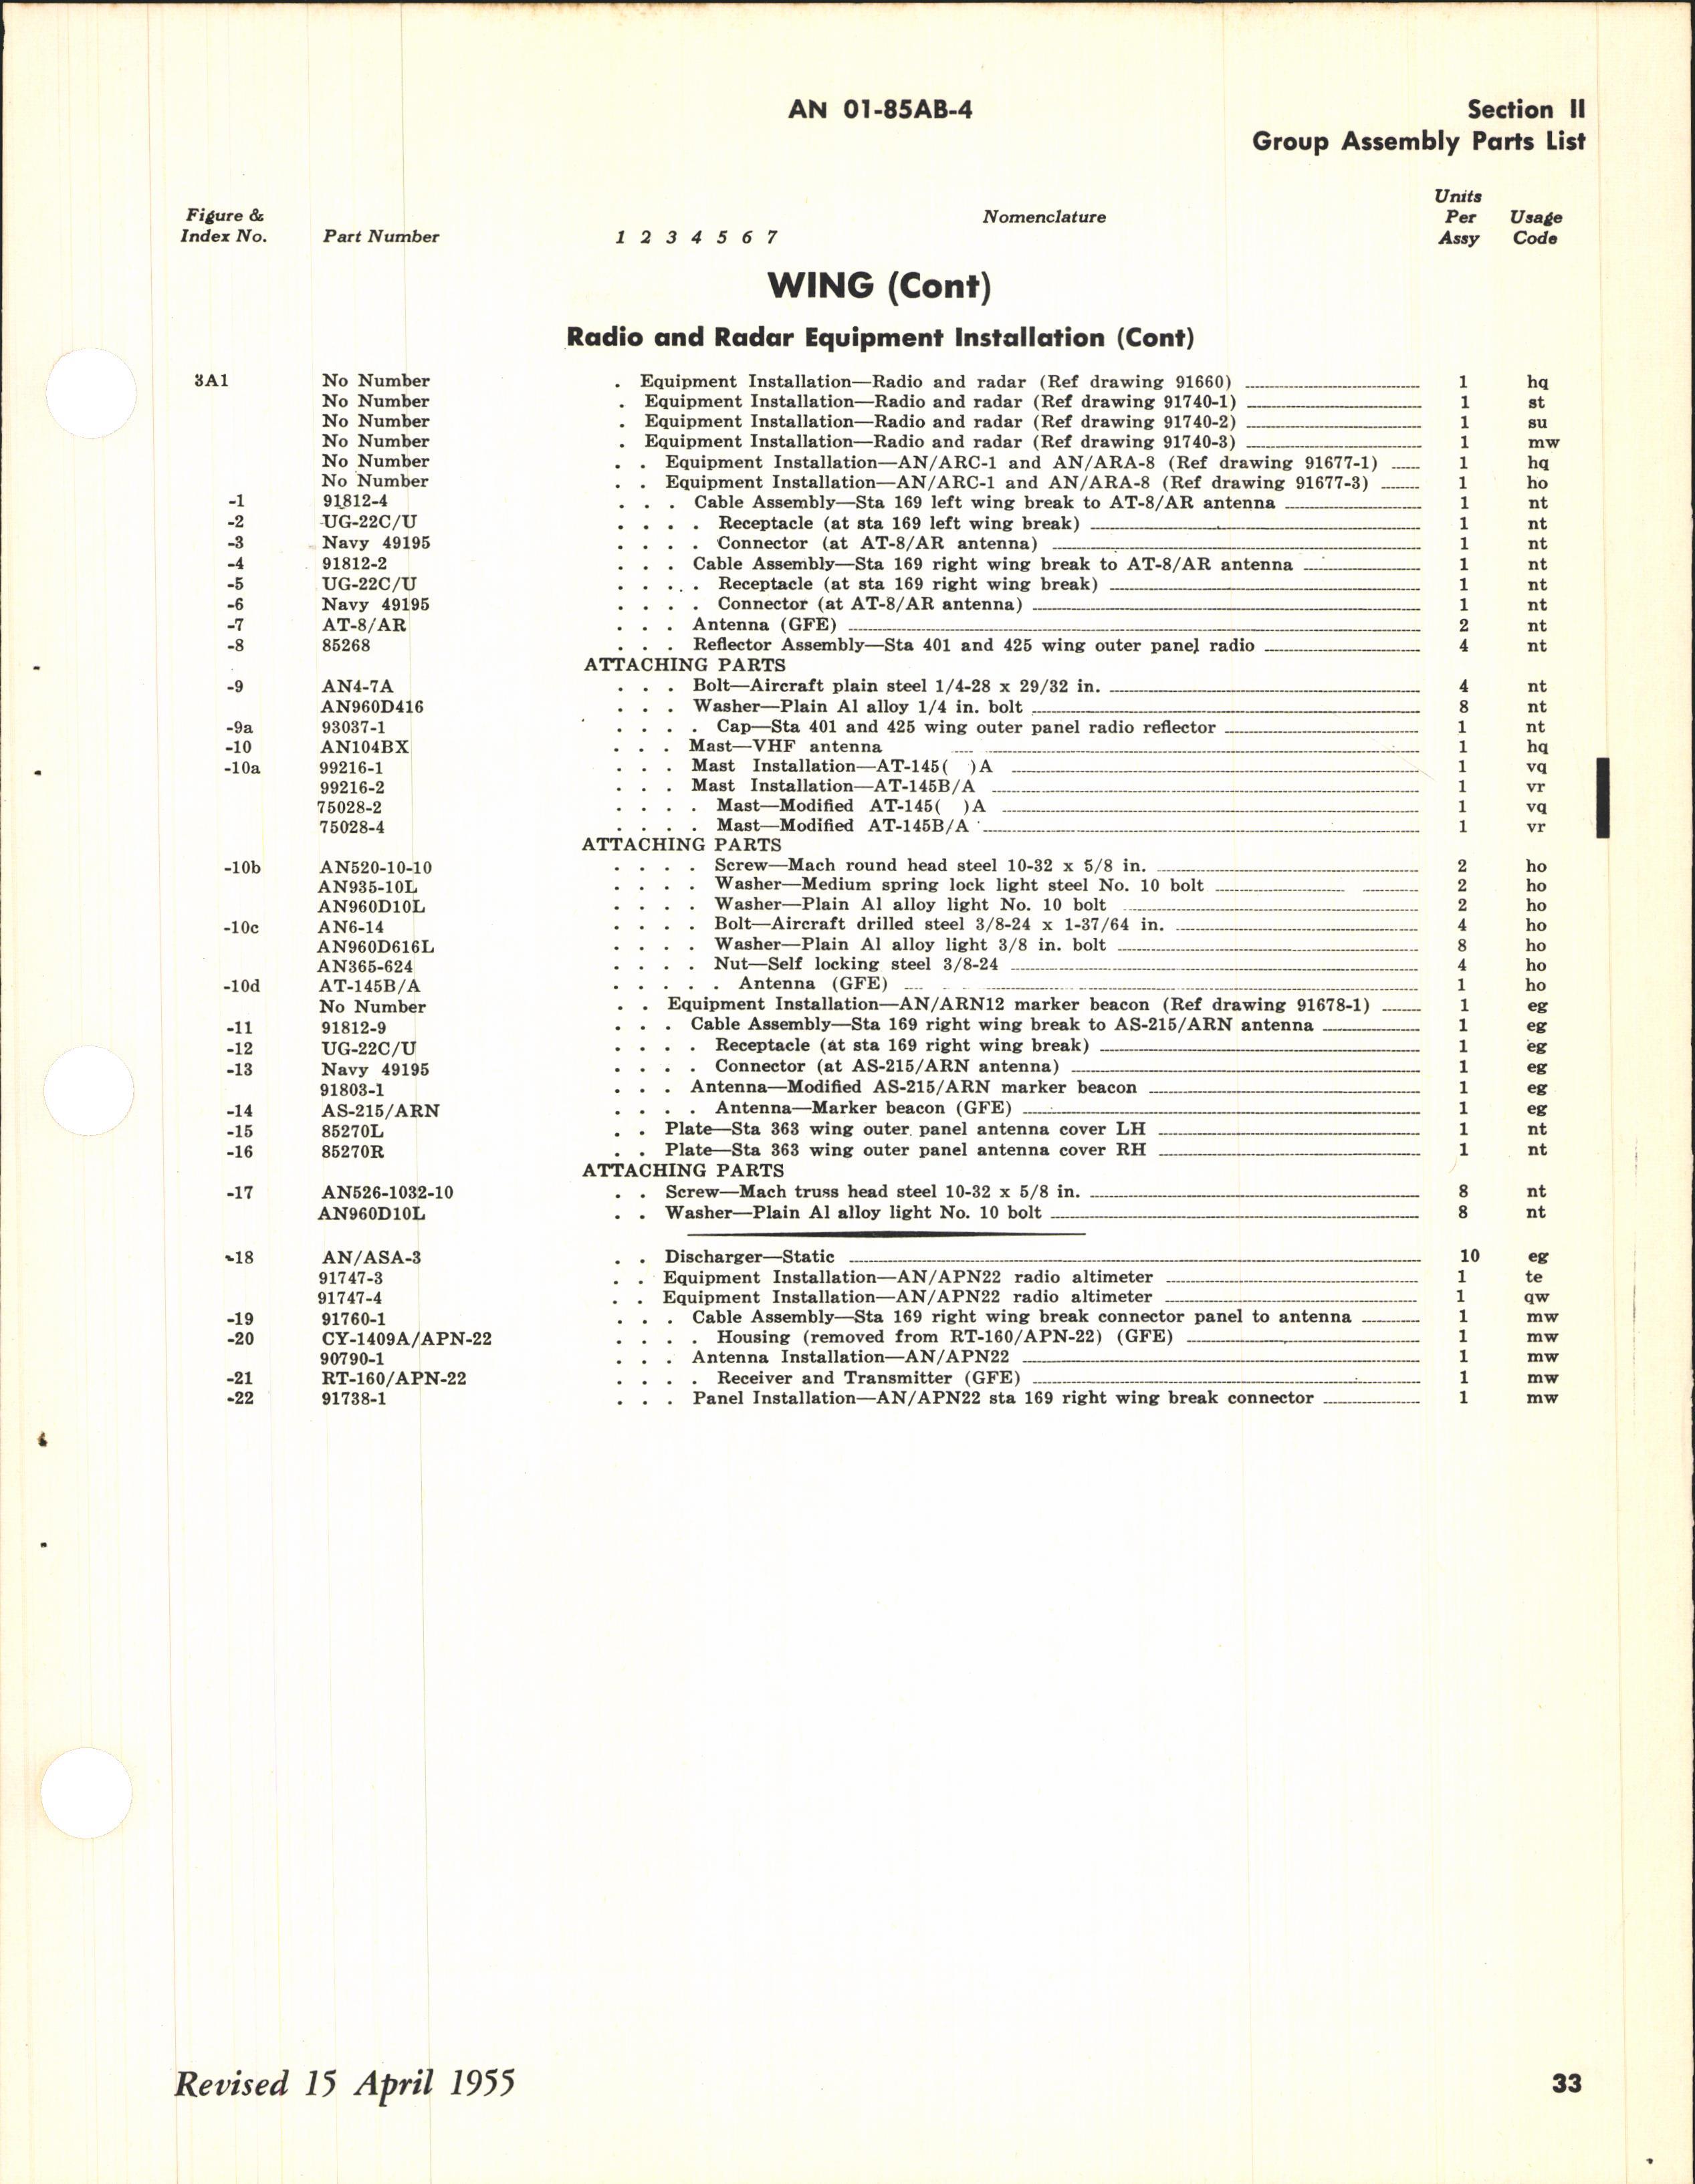 Sample page 33 from AirCorps Library document: Parts Catalog for UF-1, UF-1T, and SA-16A-GR Aircraft